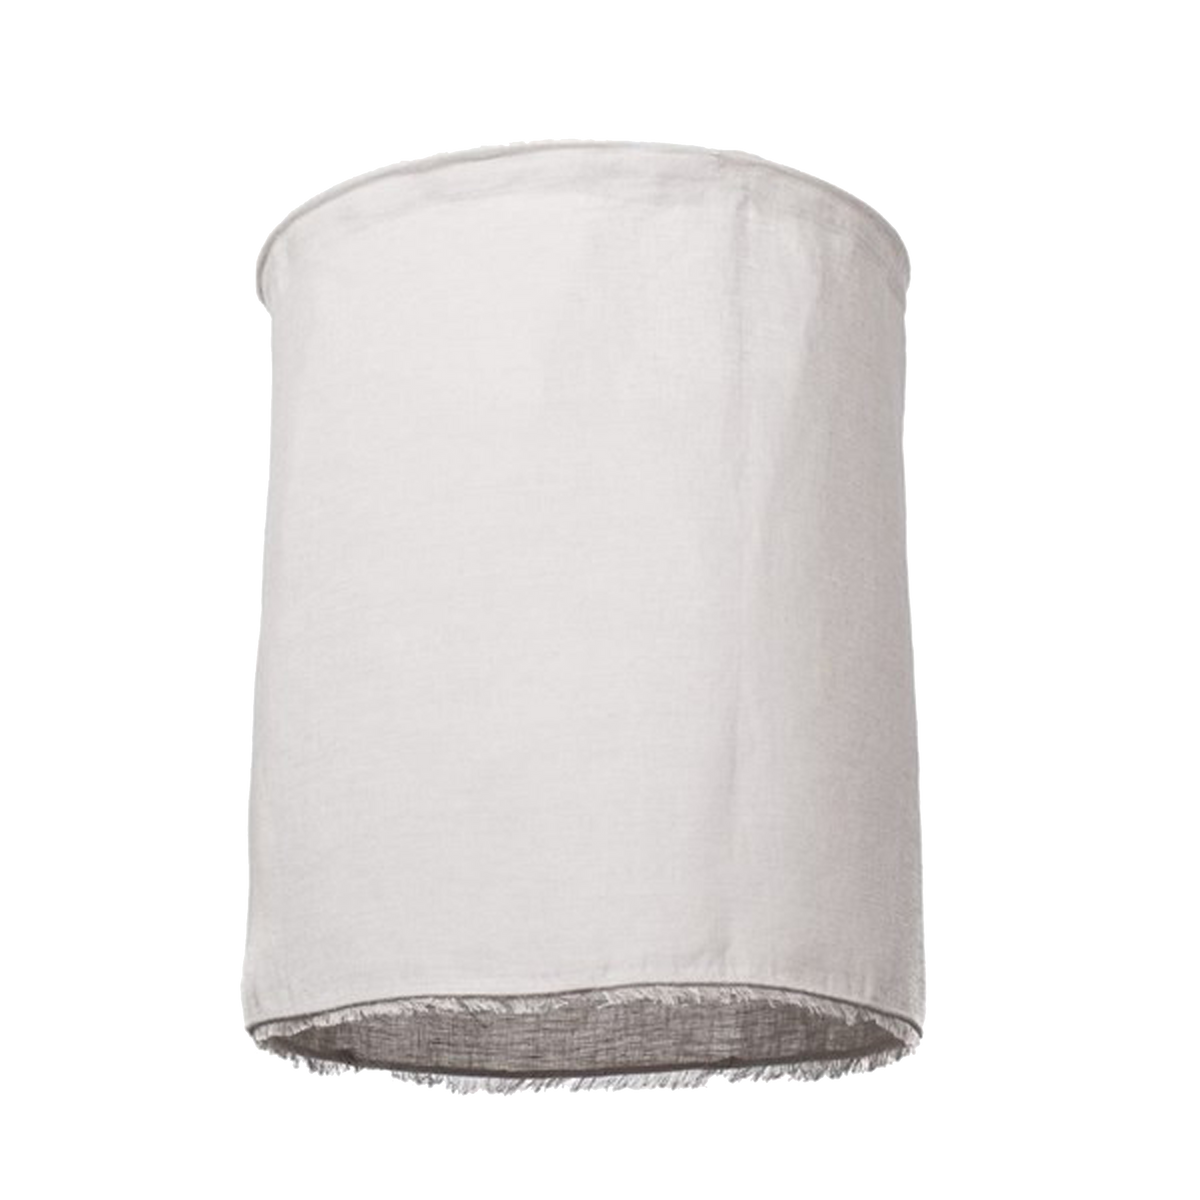 The Linen Drum Shade is made of 100% linen.